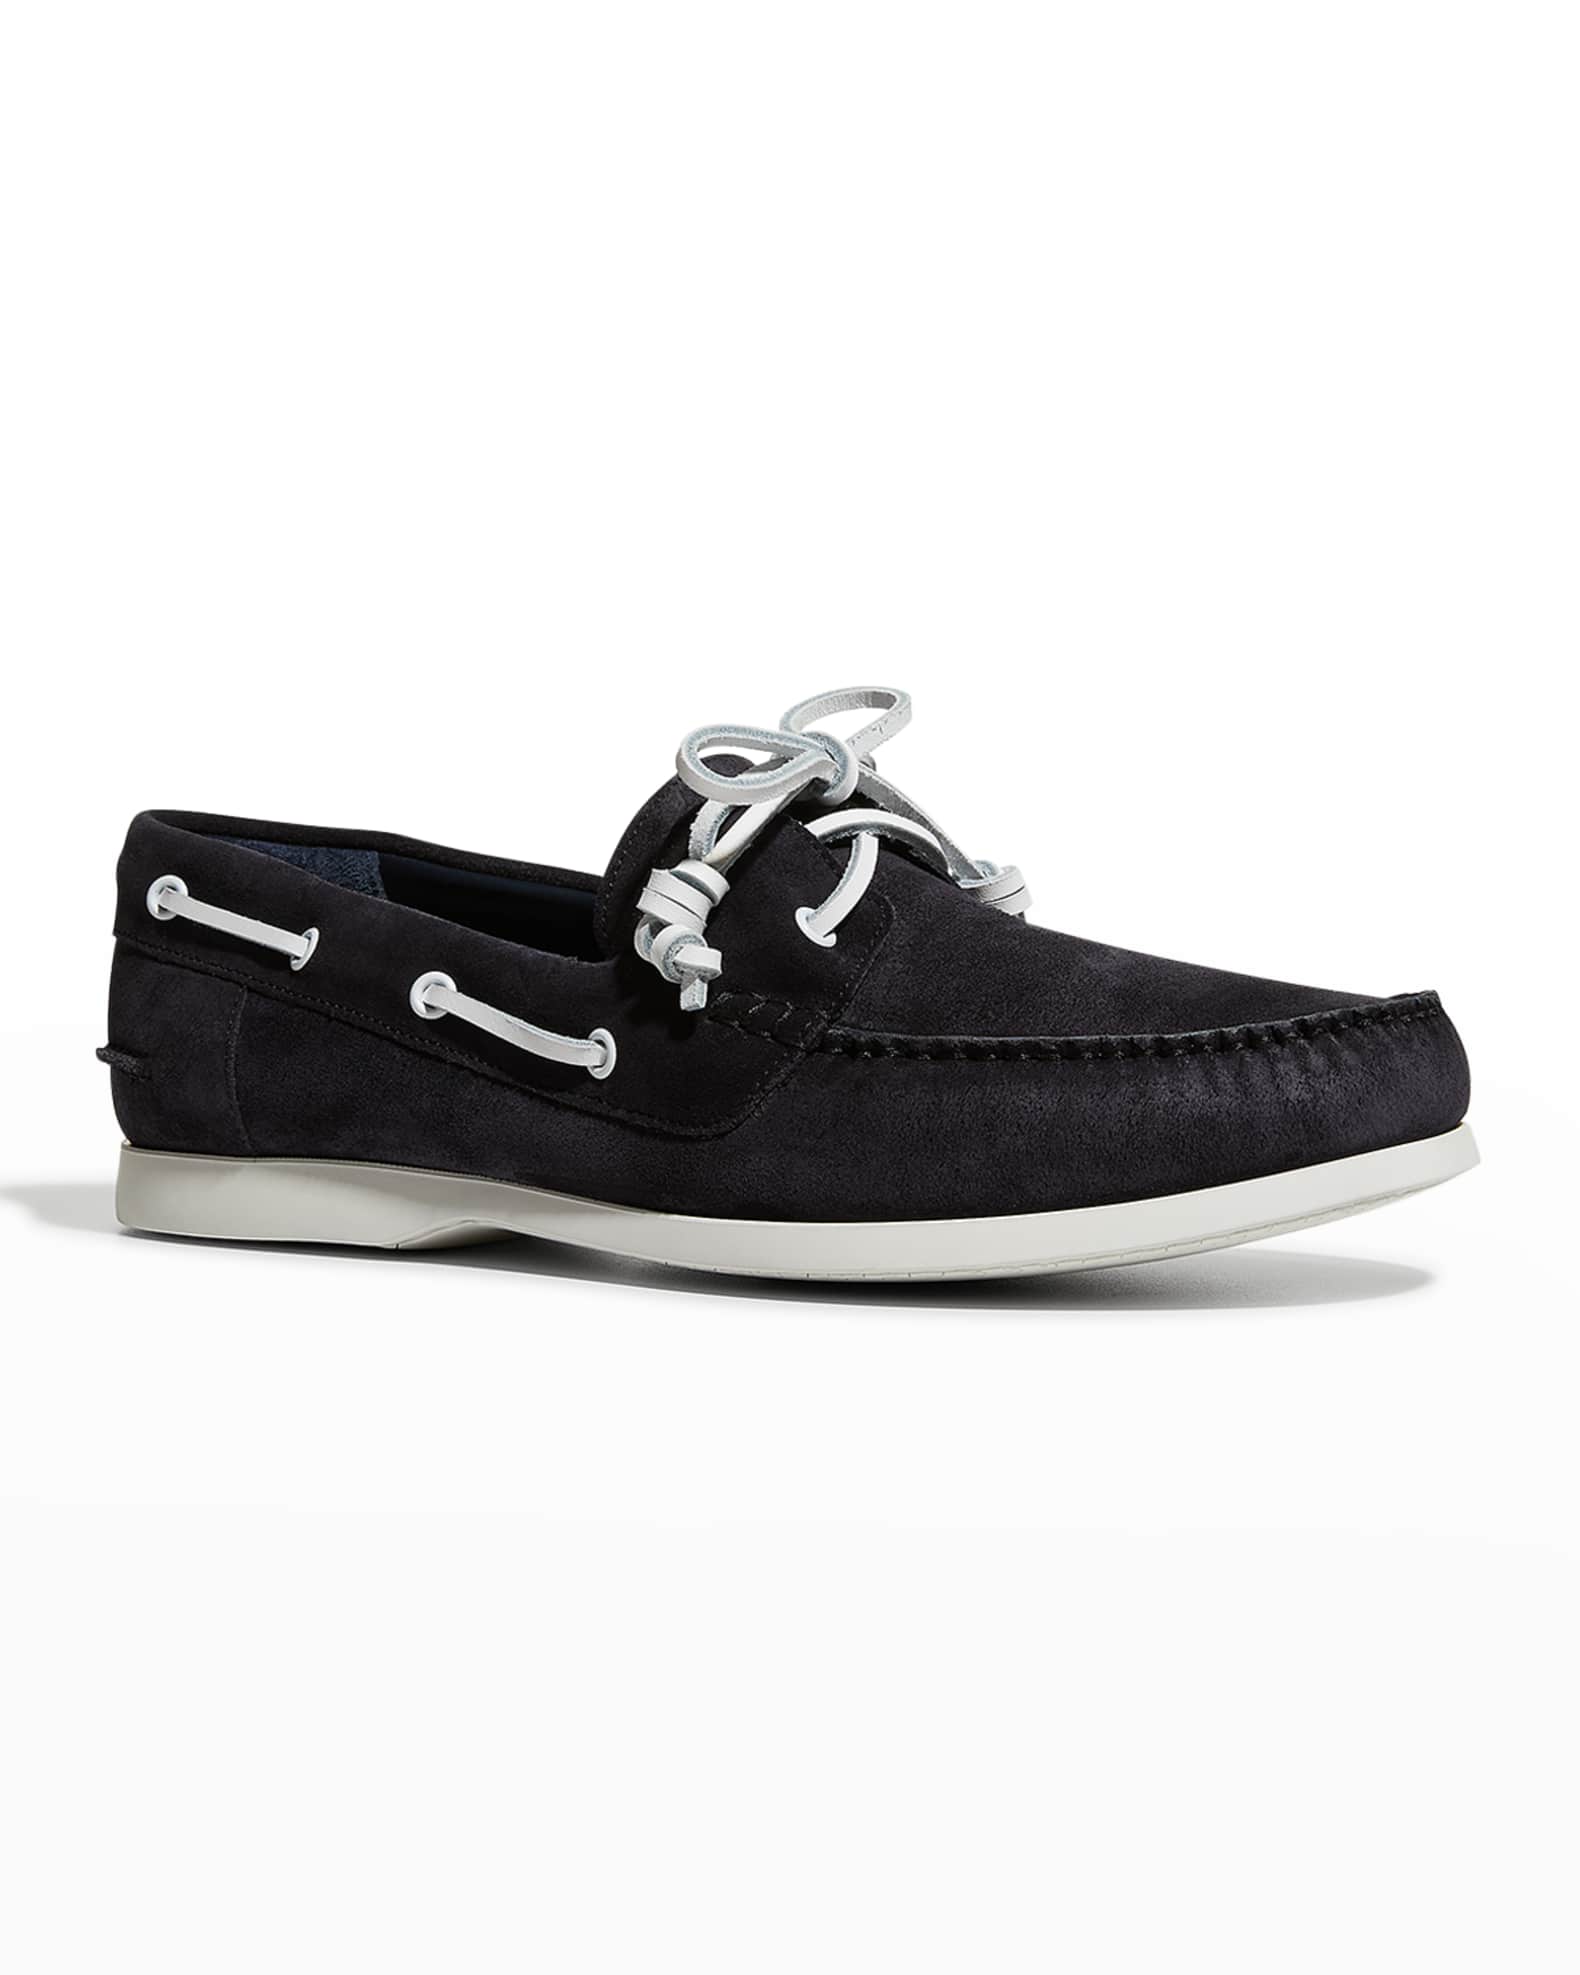 Manolo Blahnik Men's Sidmouth Suede-Leather Boat Shoes | Neiman Marcus